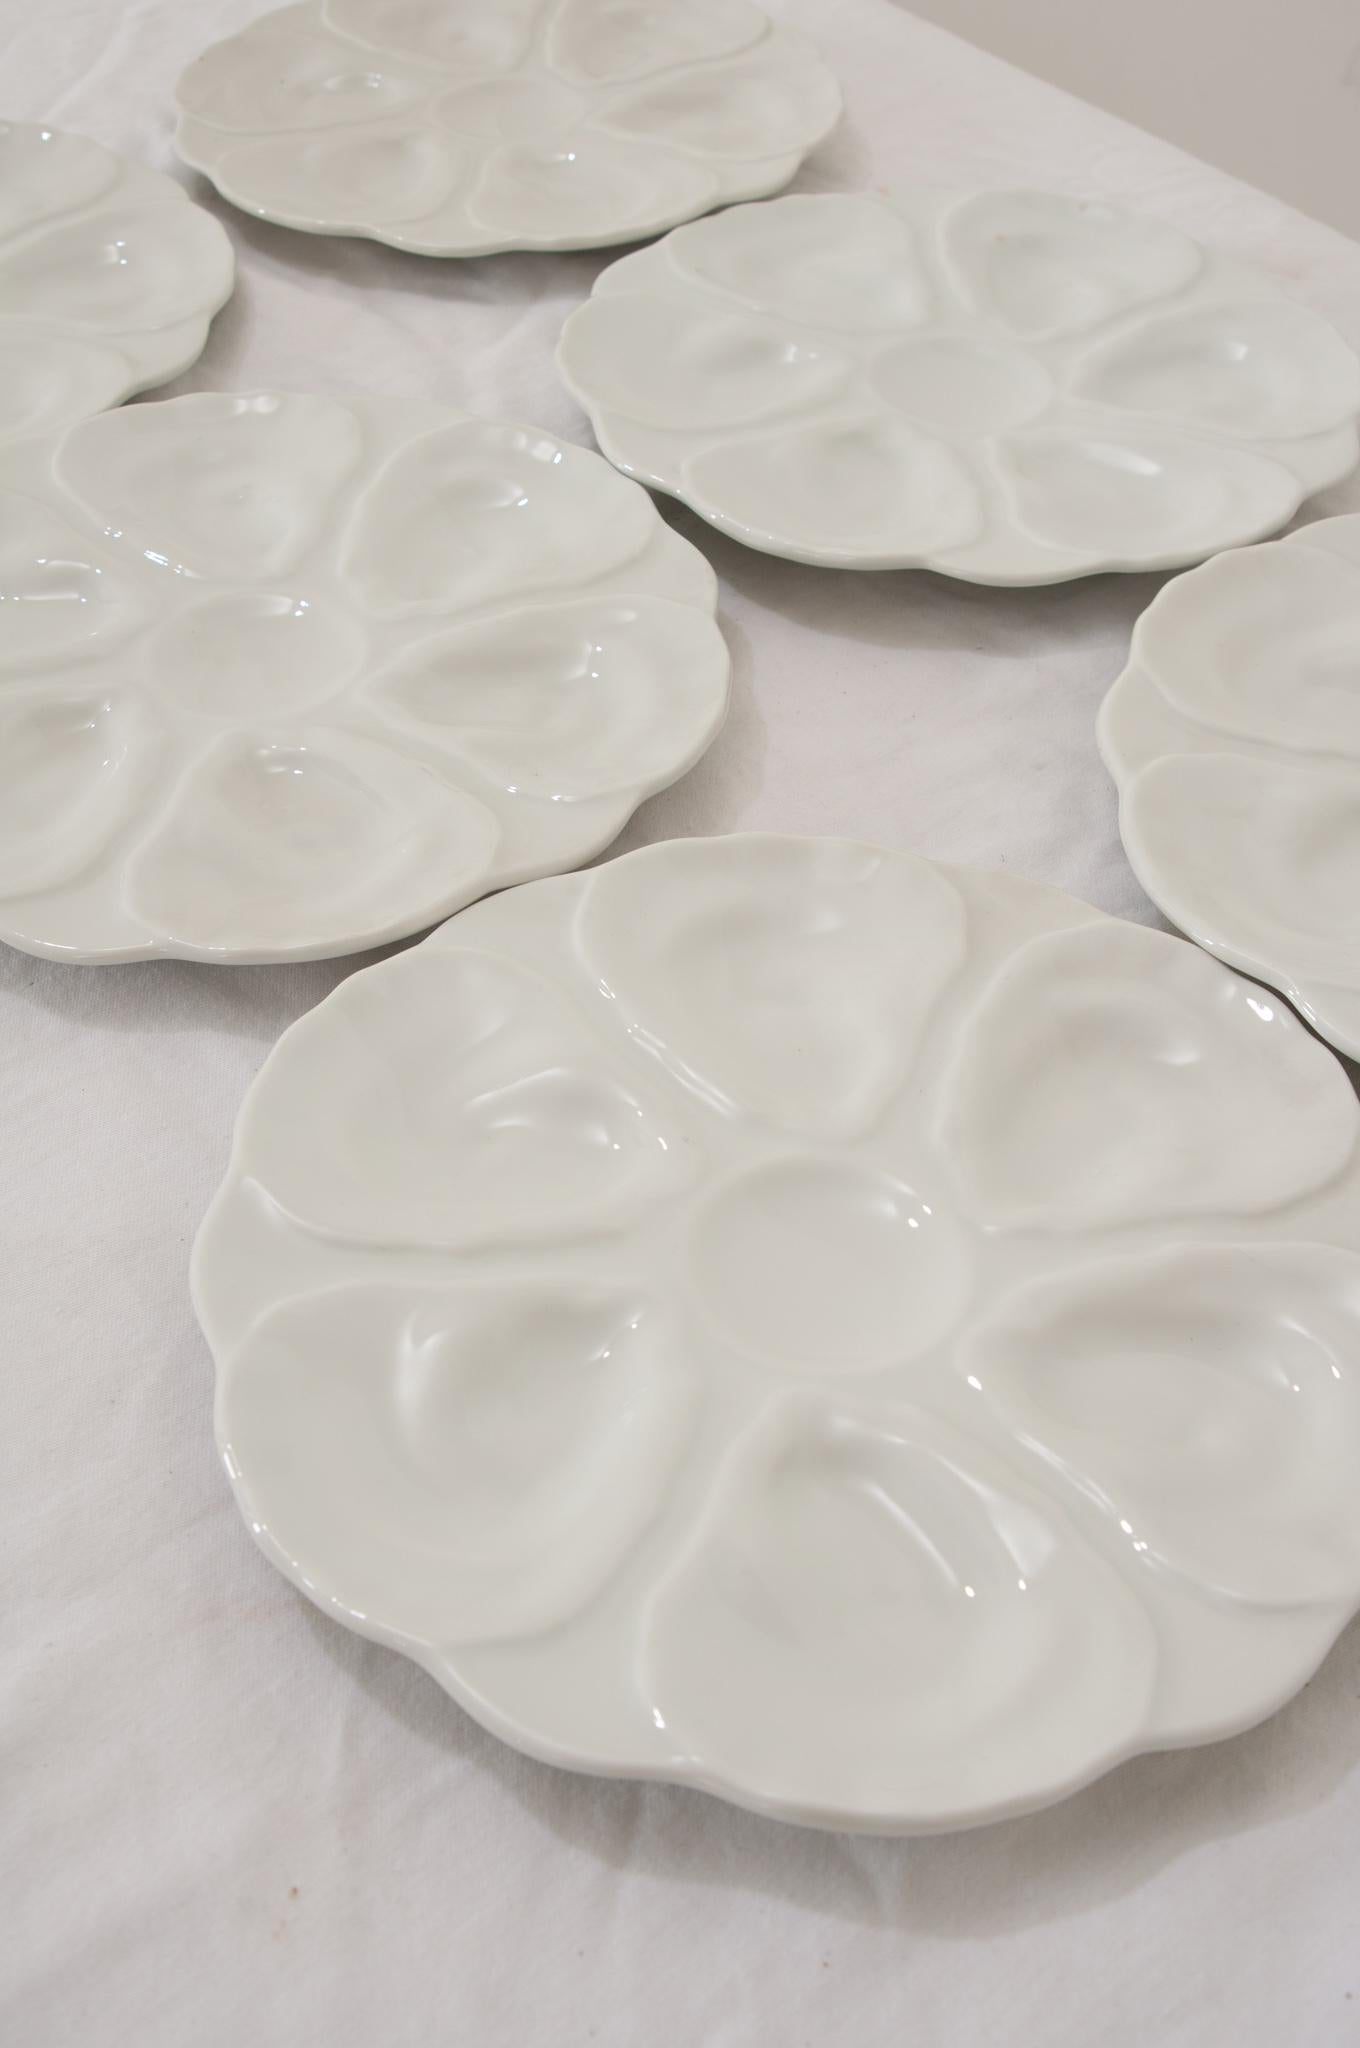 Other Set of 6 White Oyster Plates